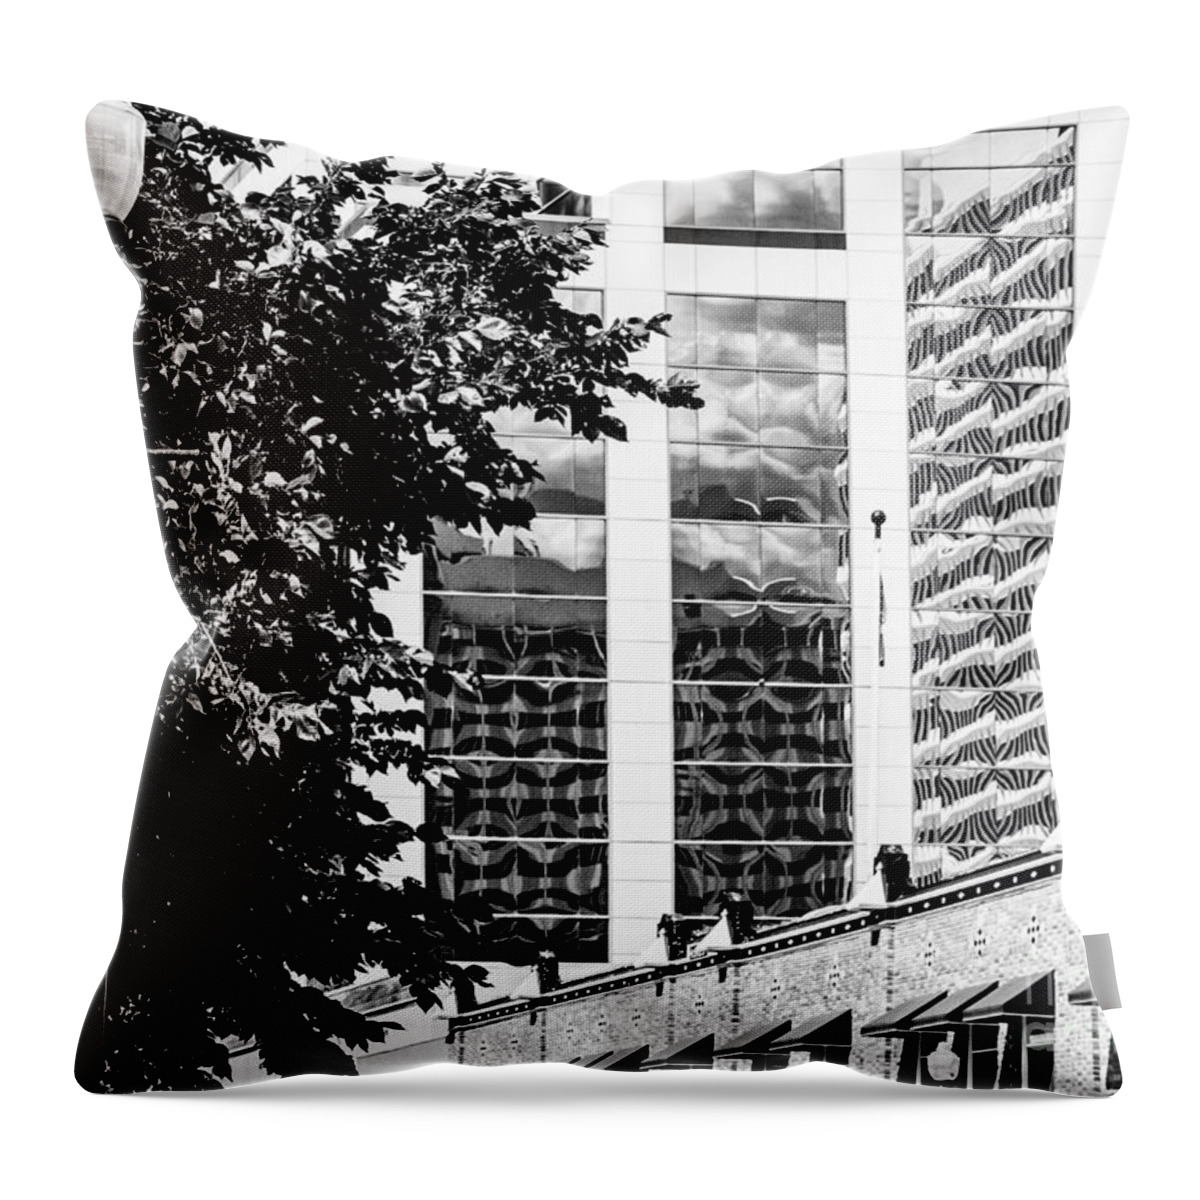 Reflections Throw Pillow featuring the photograph City Center -64 #1 by David Fabian